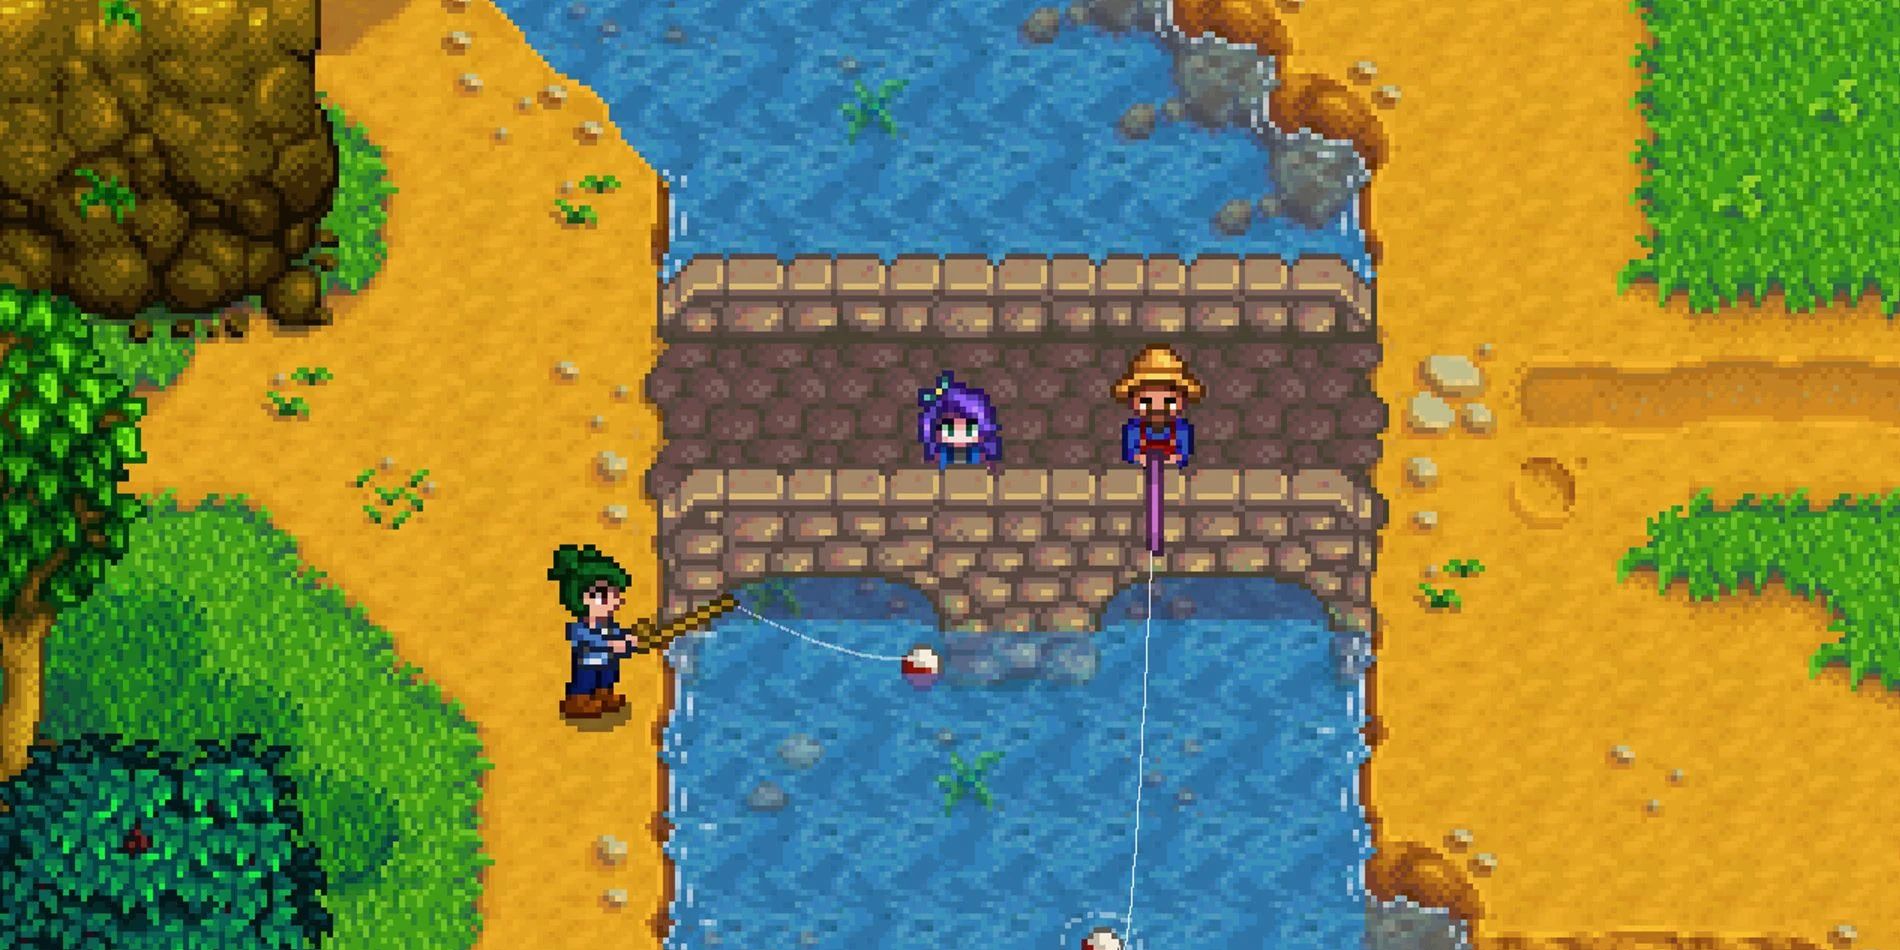 Stardew Valley Patch Fixes Infamous Fishing Rod In Head Glitch